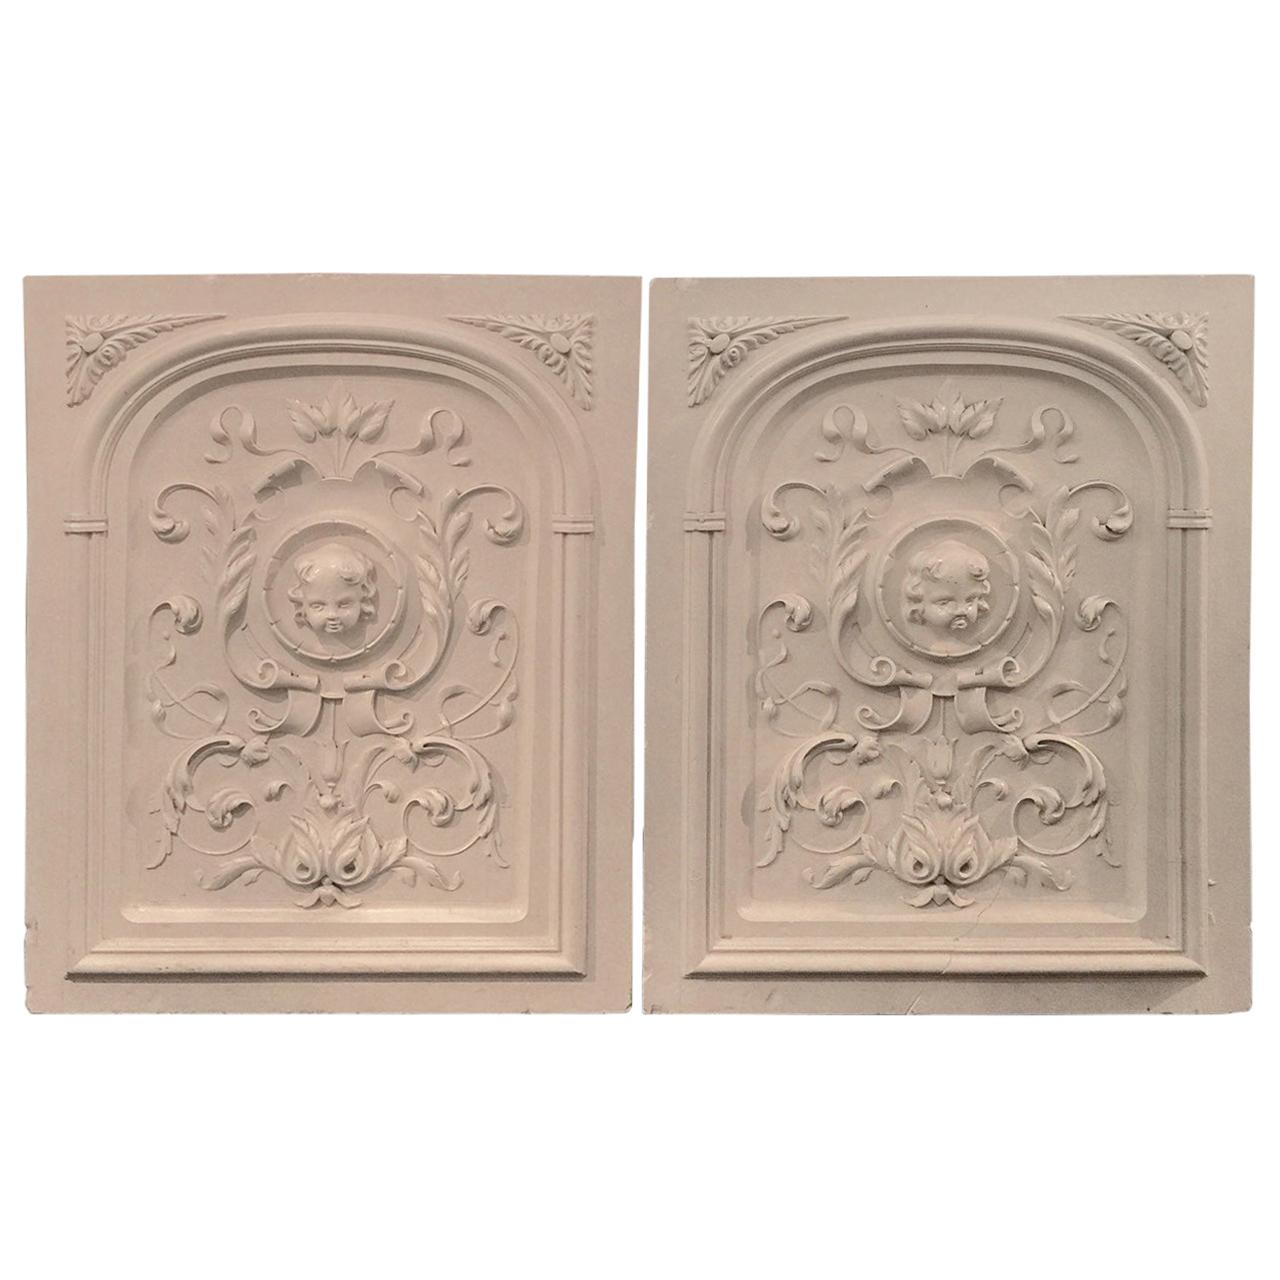 Large Pair of Plaster Decorative Wall Plaques, Bas Relief